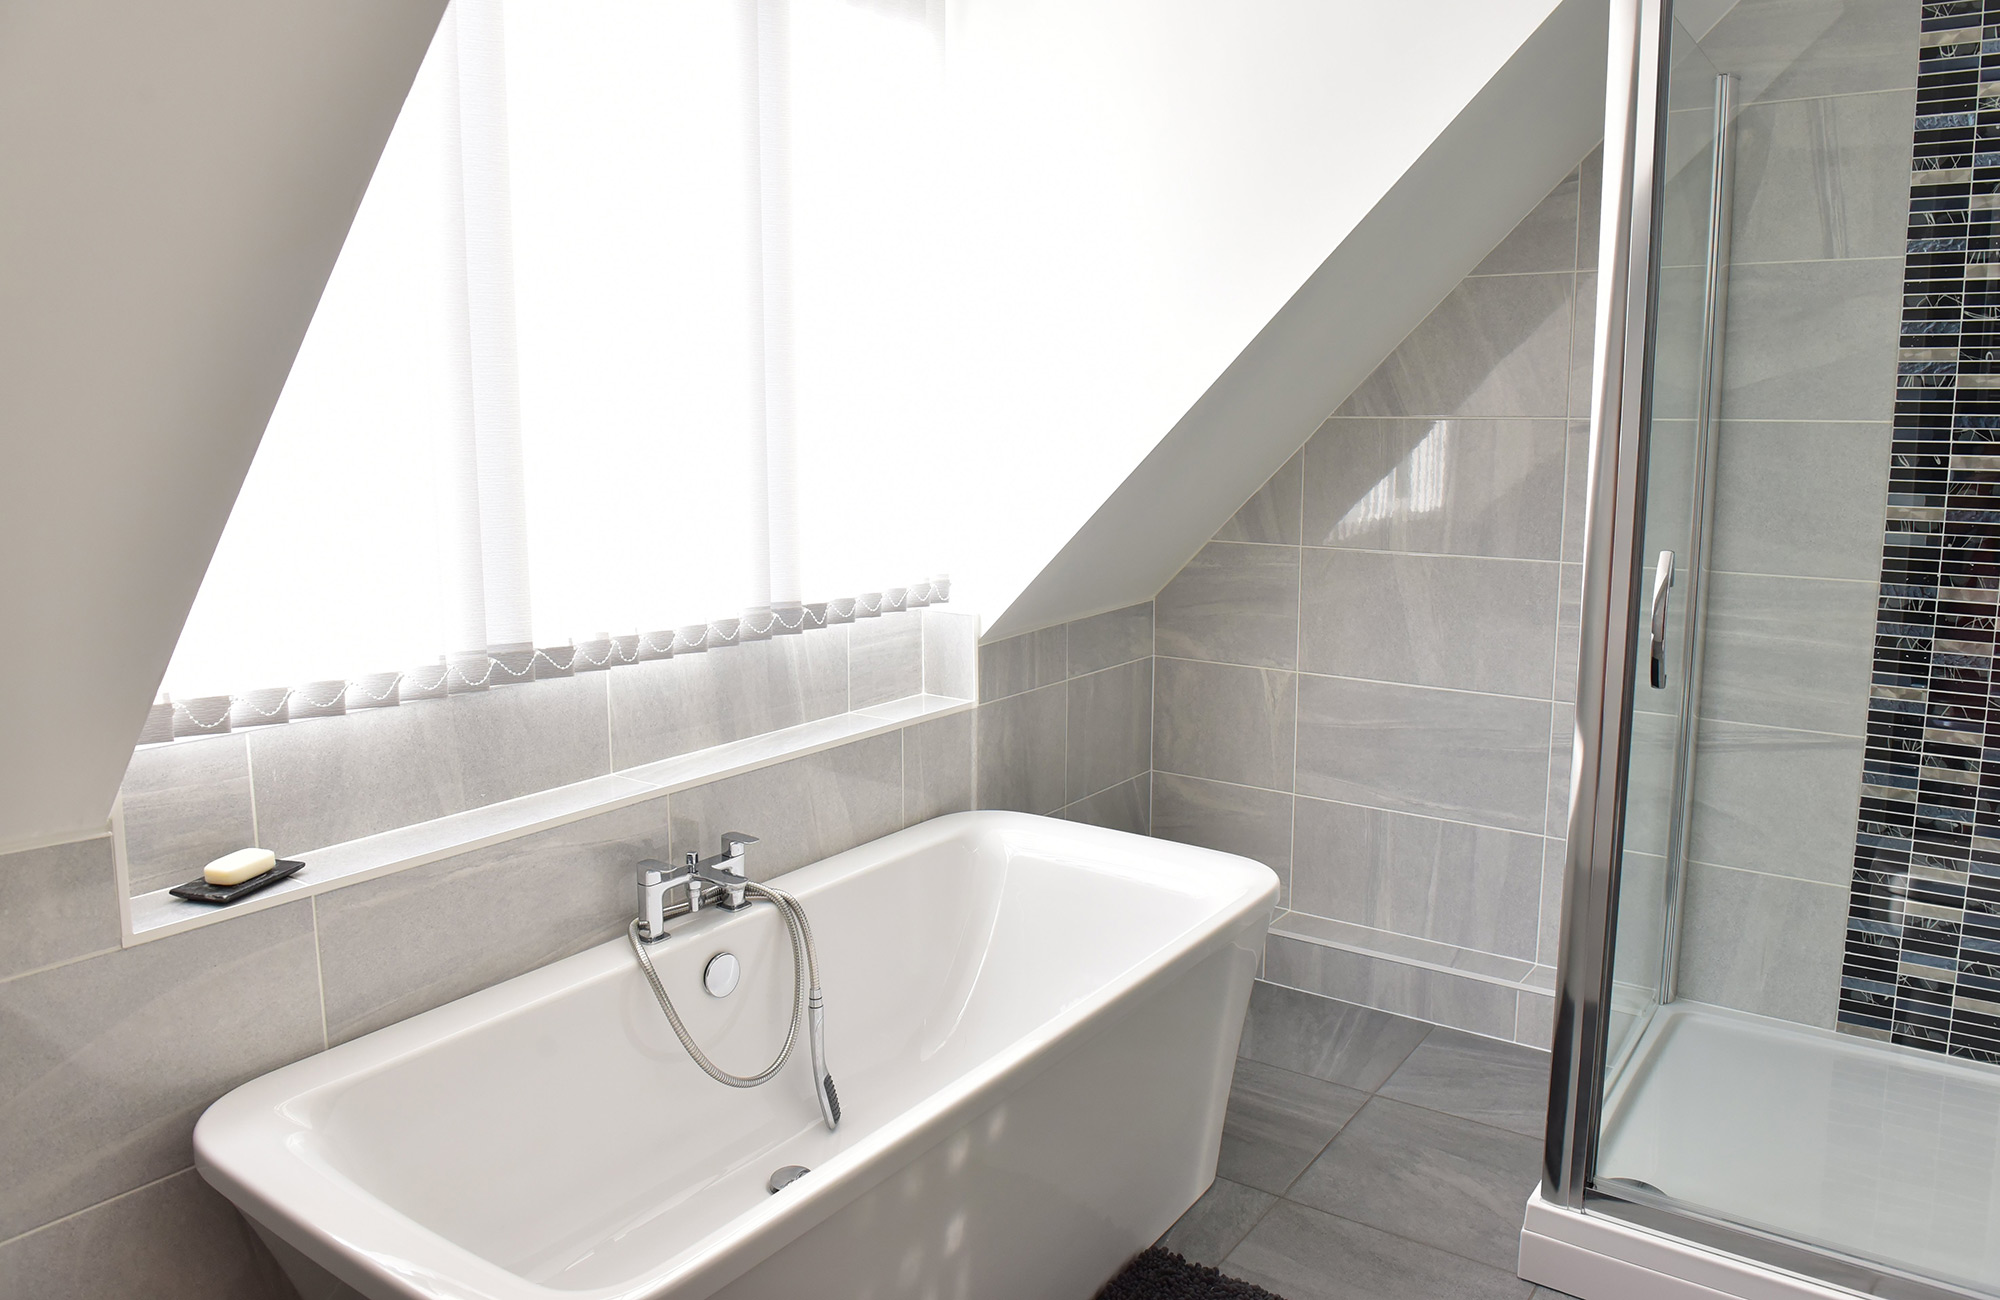 Bath in a new bathroom installed by the KBB Centre in Ipswich